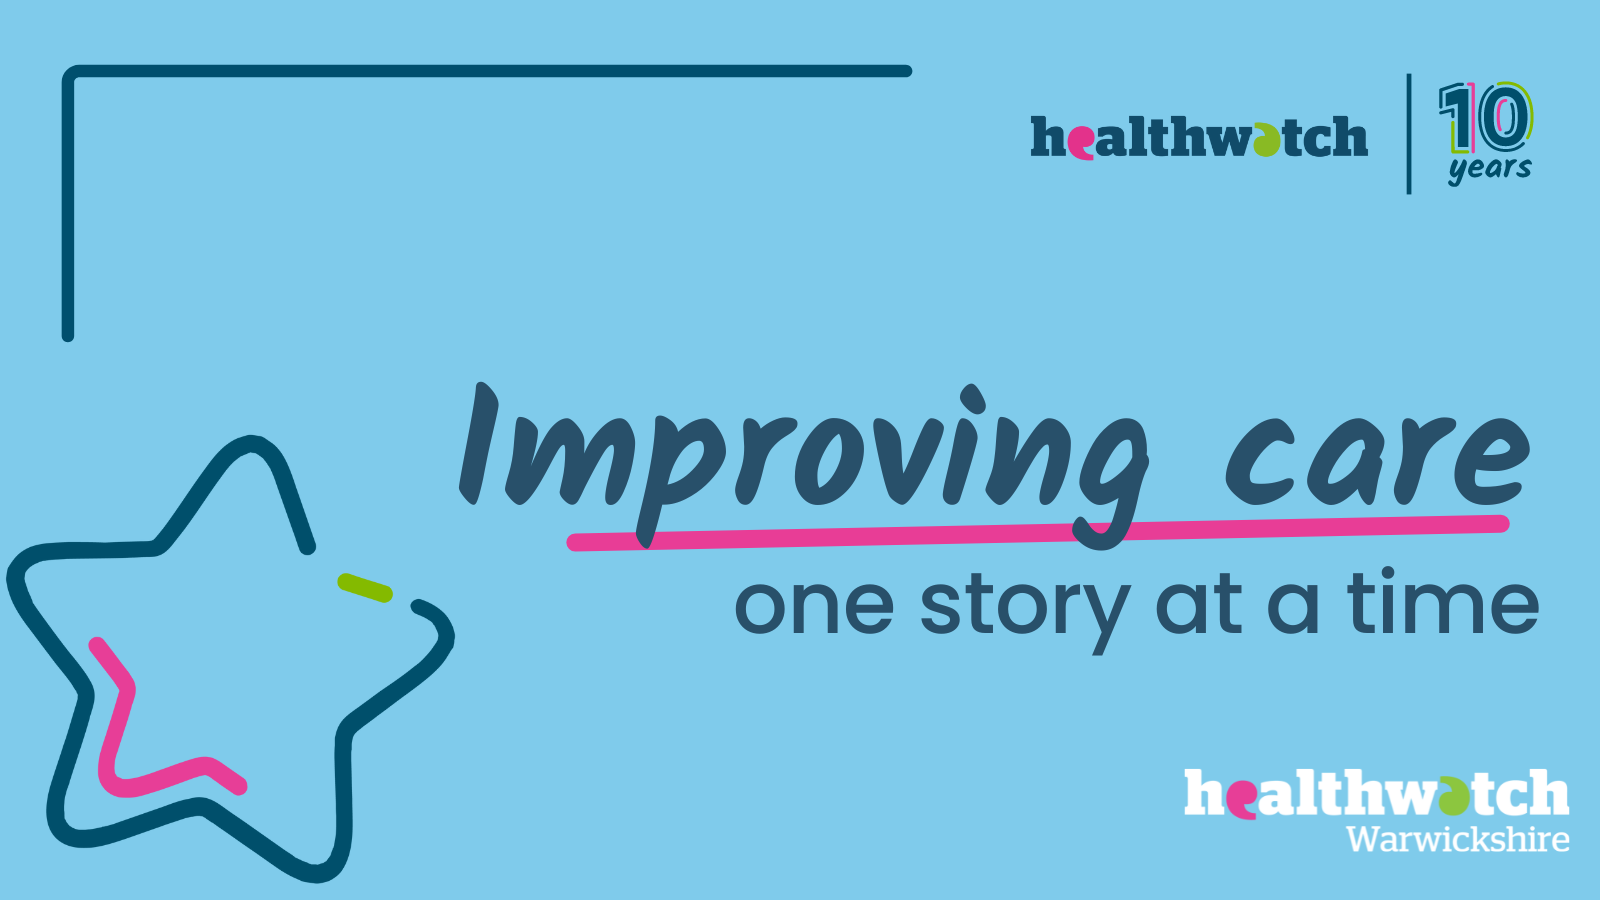 Improving care one story at a time